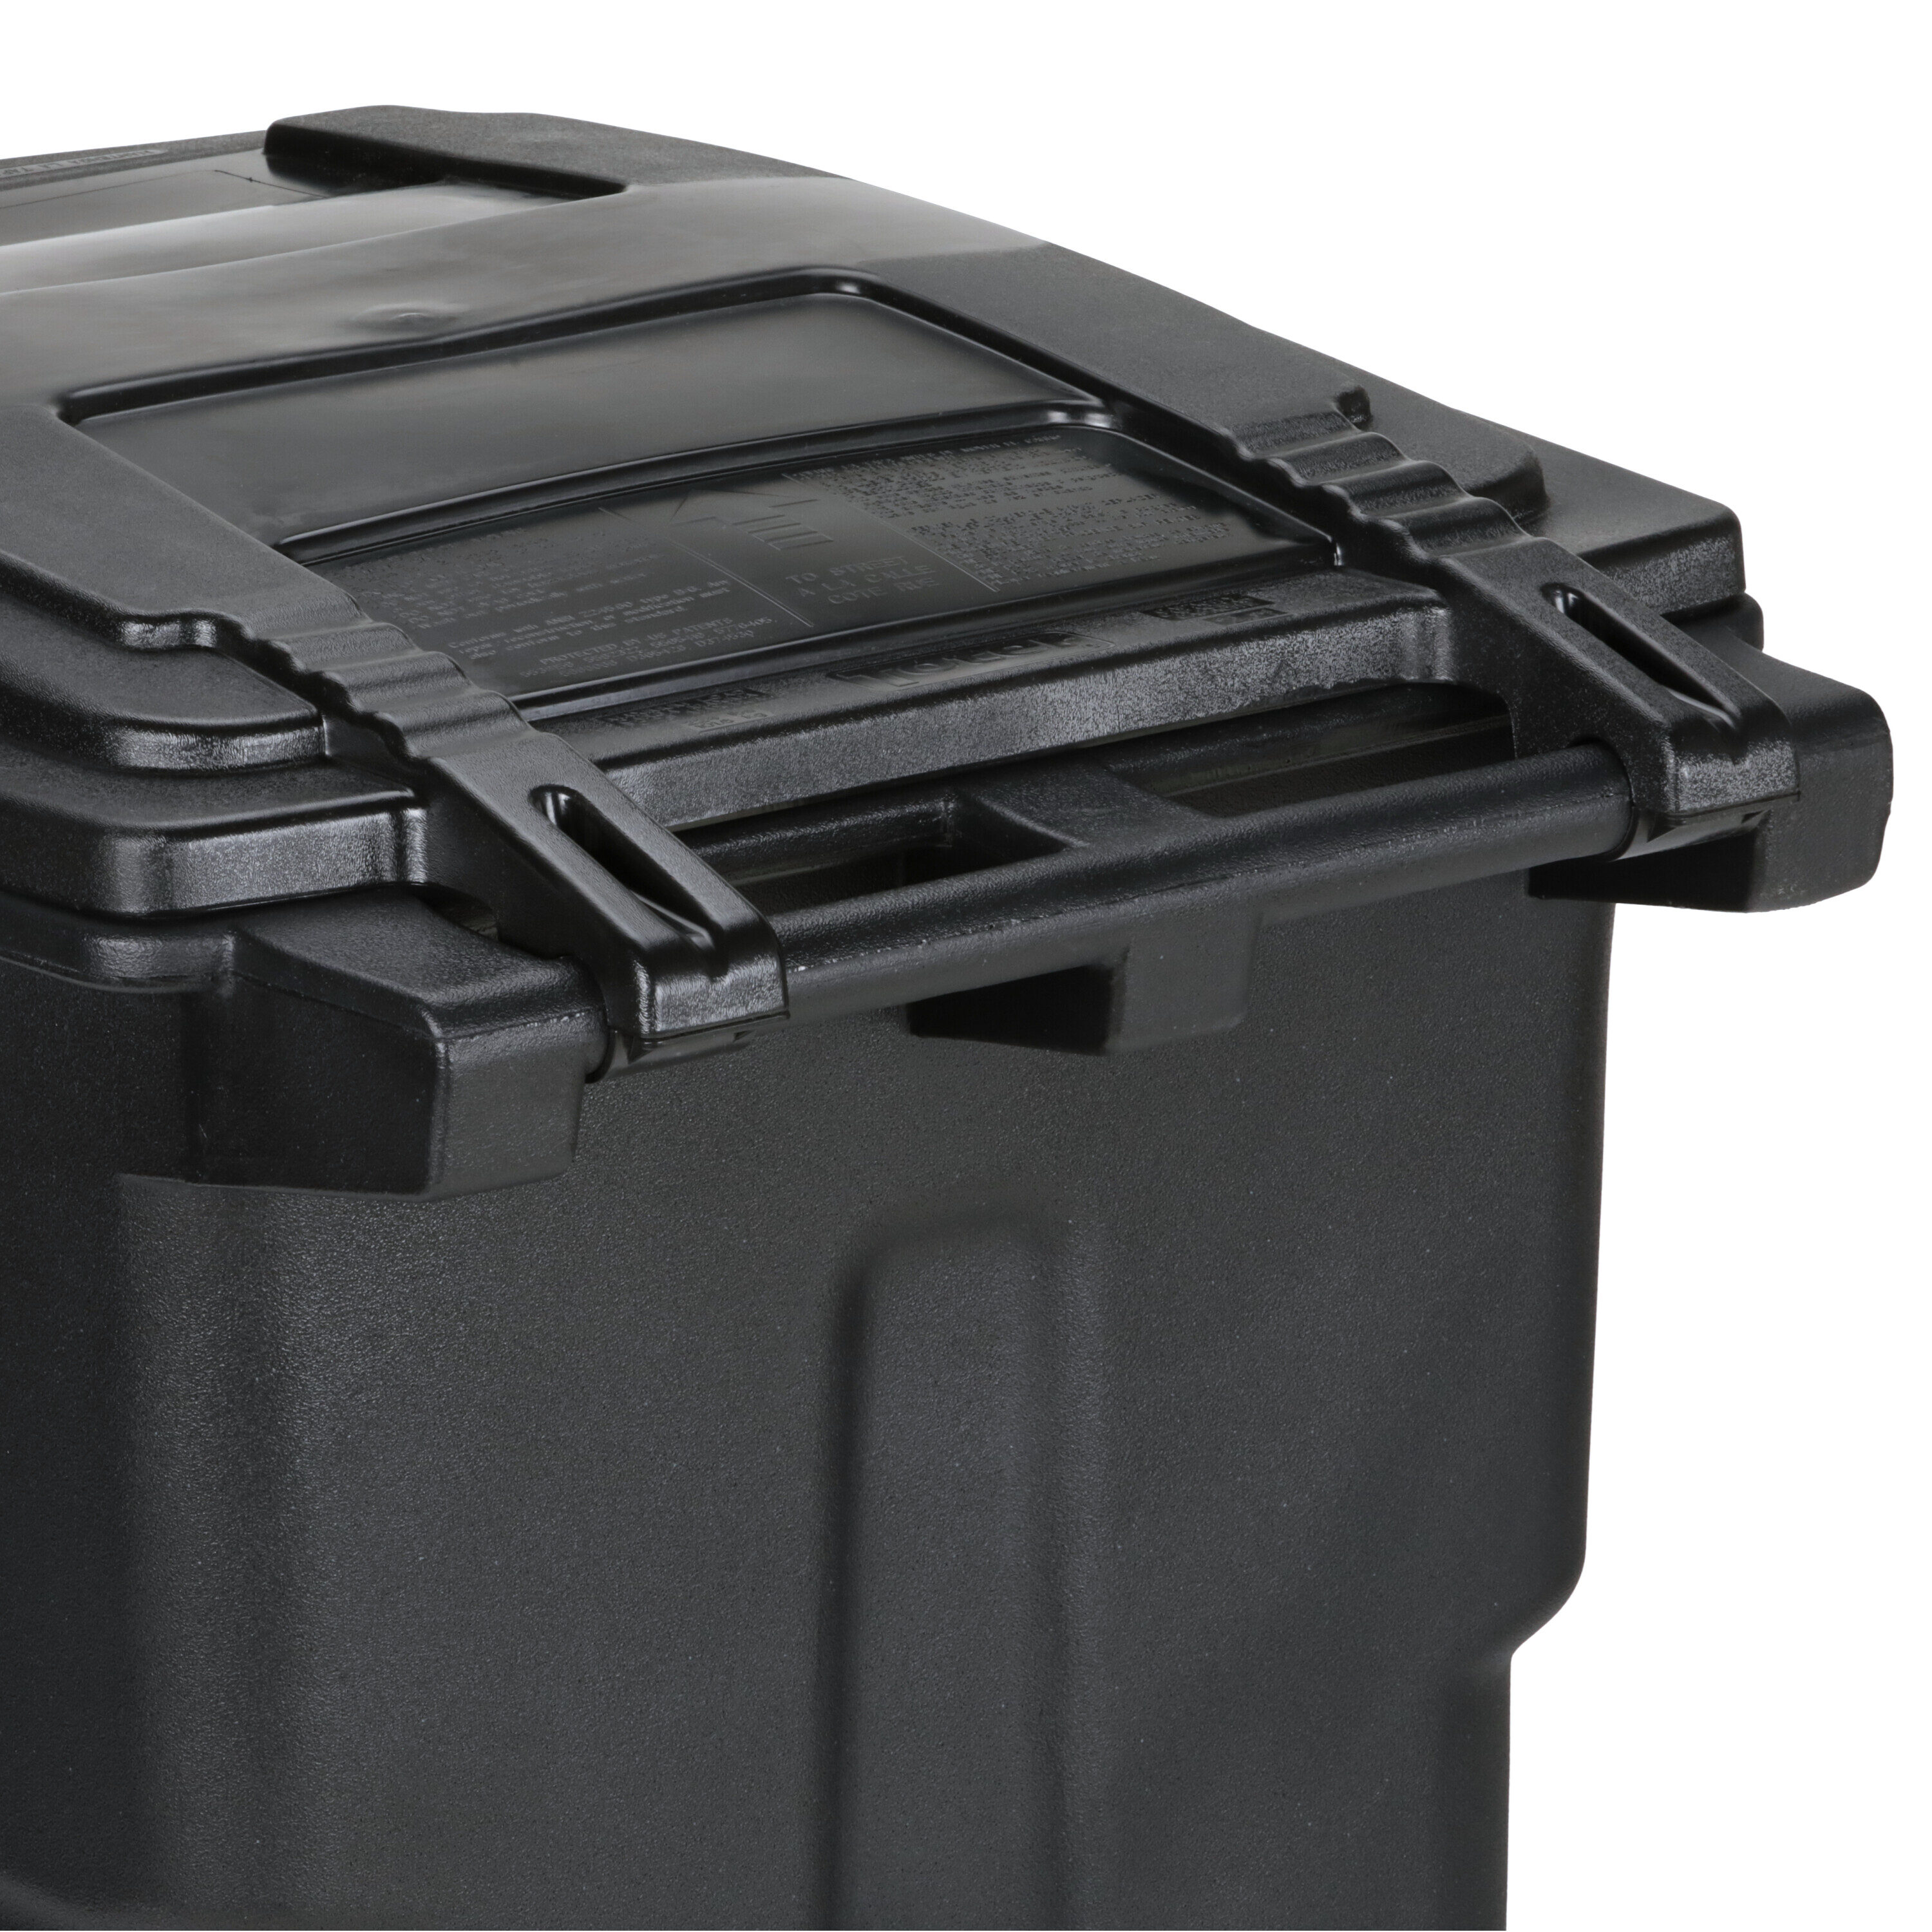 Cox Hardware and Lumber - Commercial Trash Can, 64 Ga